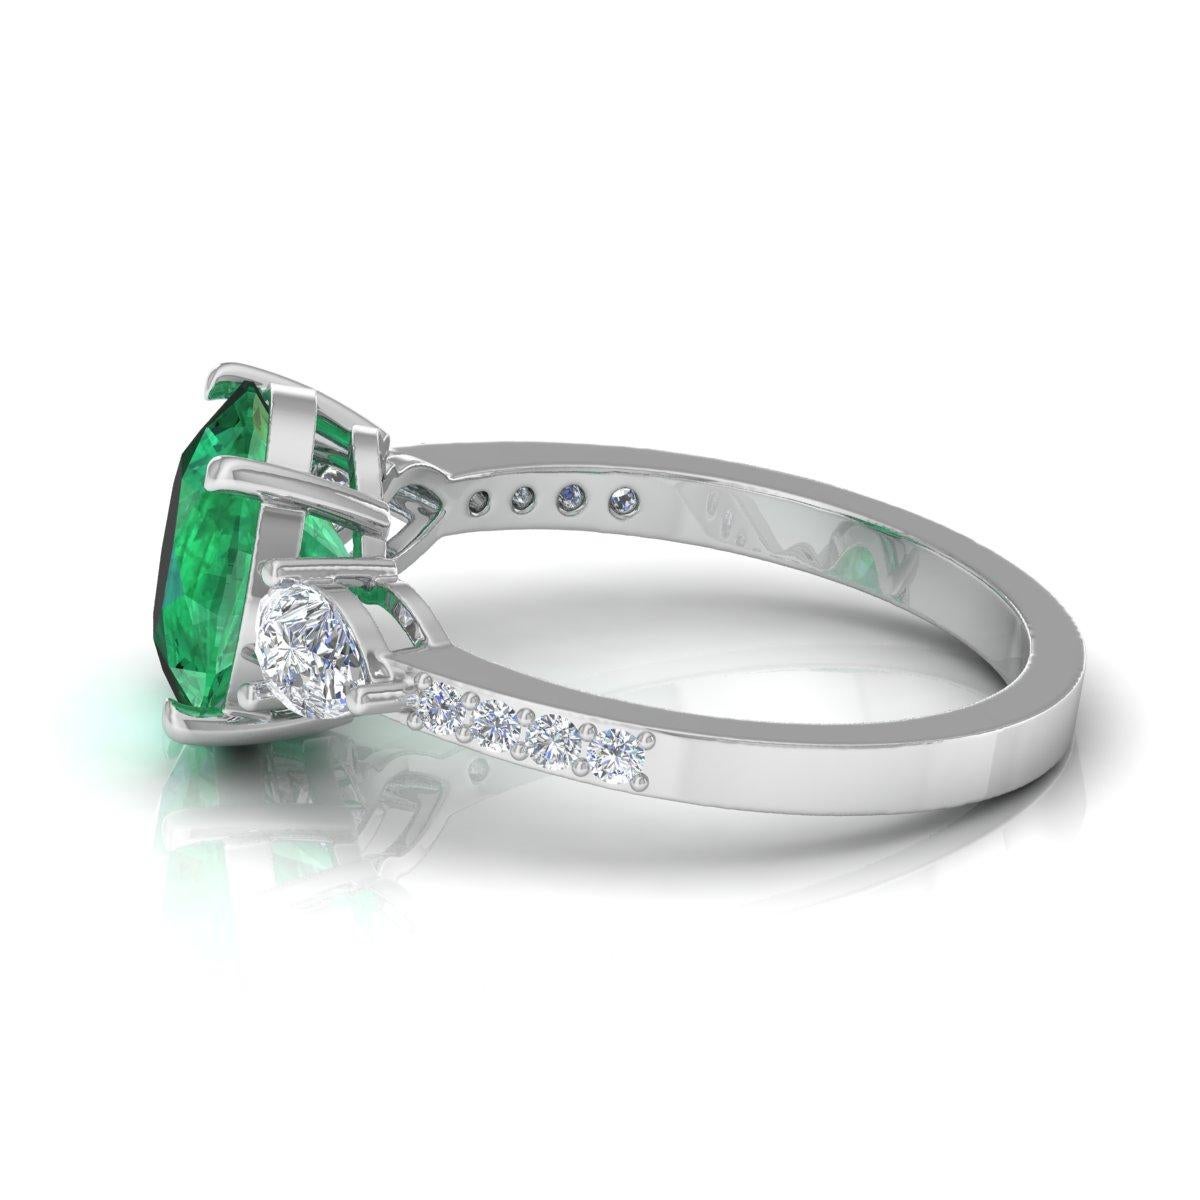 Item Code:- SER-21324A (14k)
Gross Wt :- 2.58 gm
14k Solid White Gold Wt :- 2.06 gm
Natural Diamond Wt :- 0.38 ct ( AVERAGE DIAMOND CLARITY SI1-SI2 & COLOR H-I )
Zambian Emerald Wt :- 2.22 ct
Ring Size :- 7 US & All size available

✦